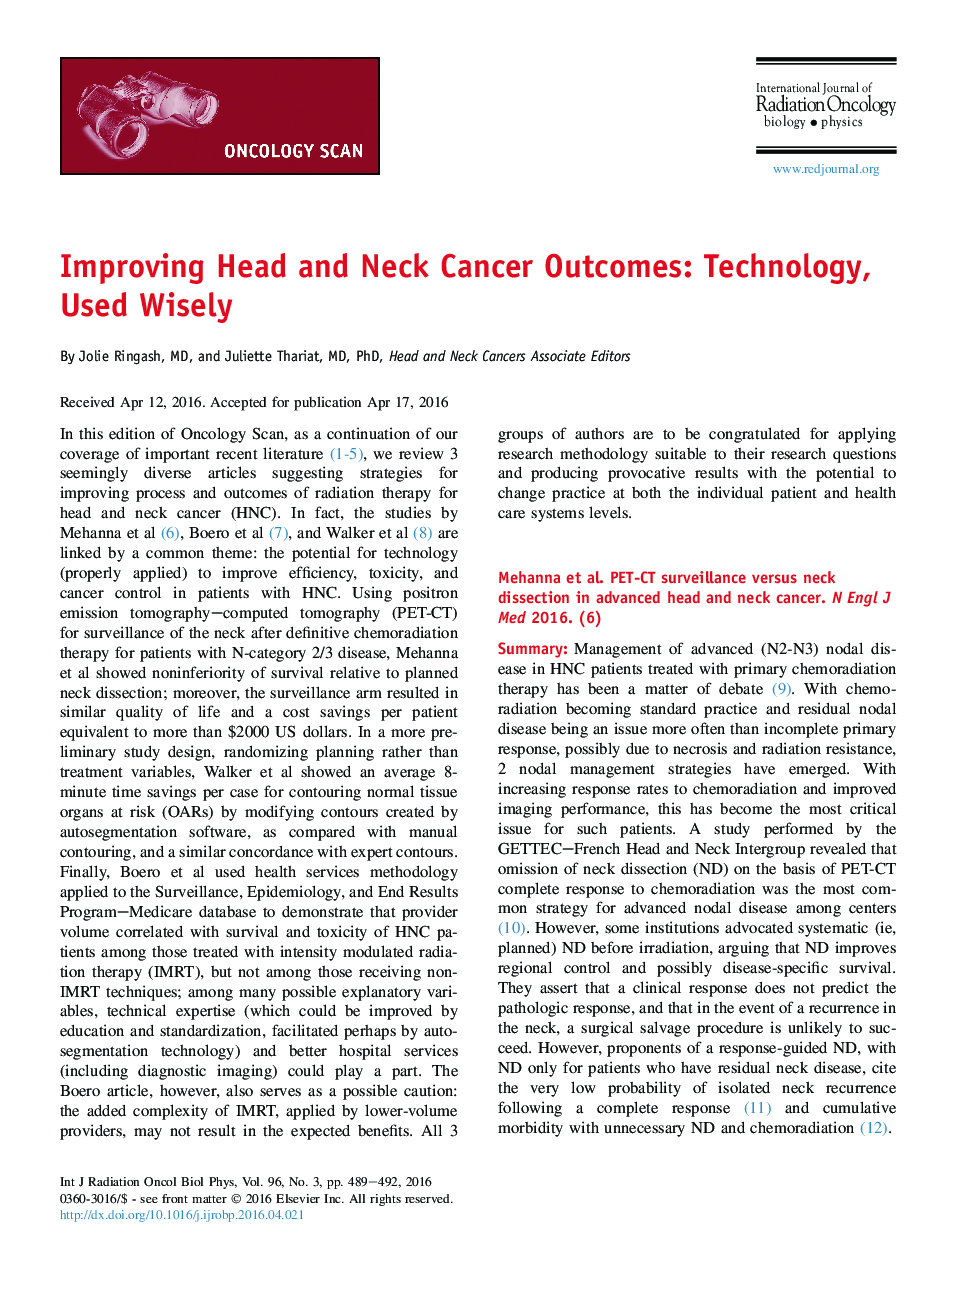 Improving Head and Neck Cancer Outcomes: Technology, Used Wisely